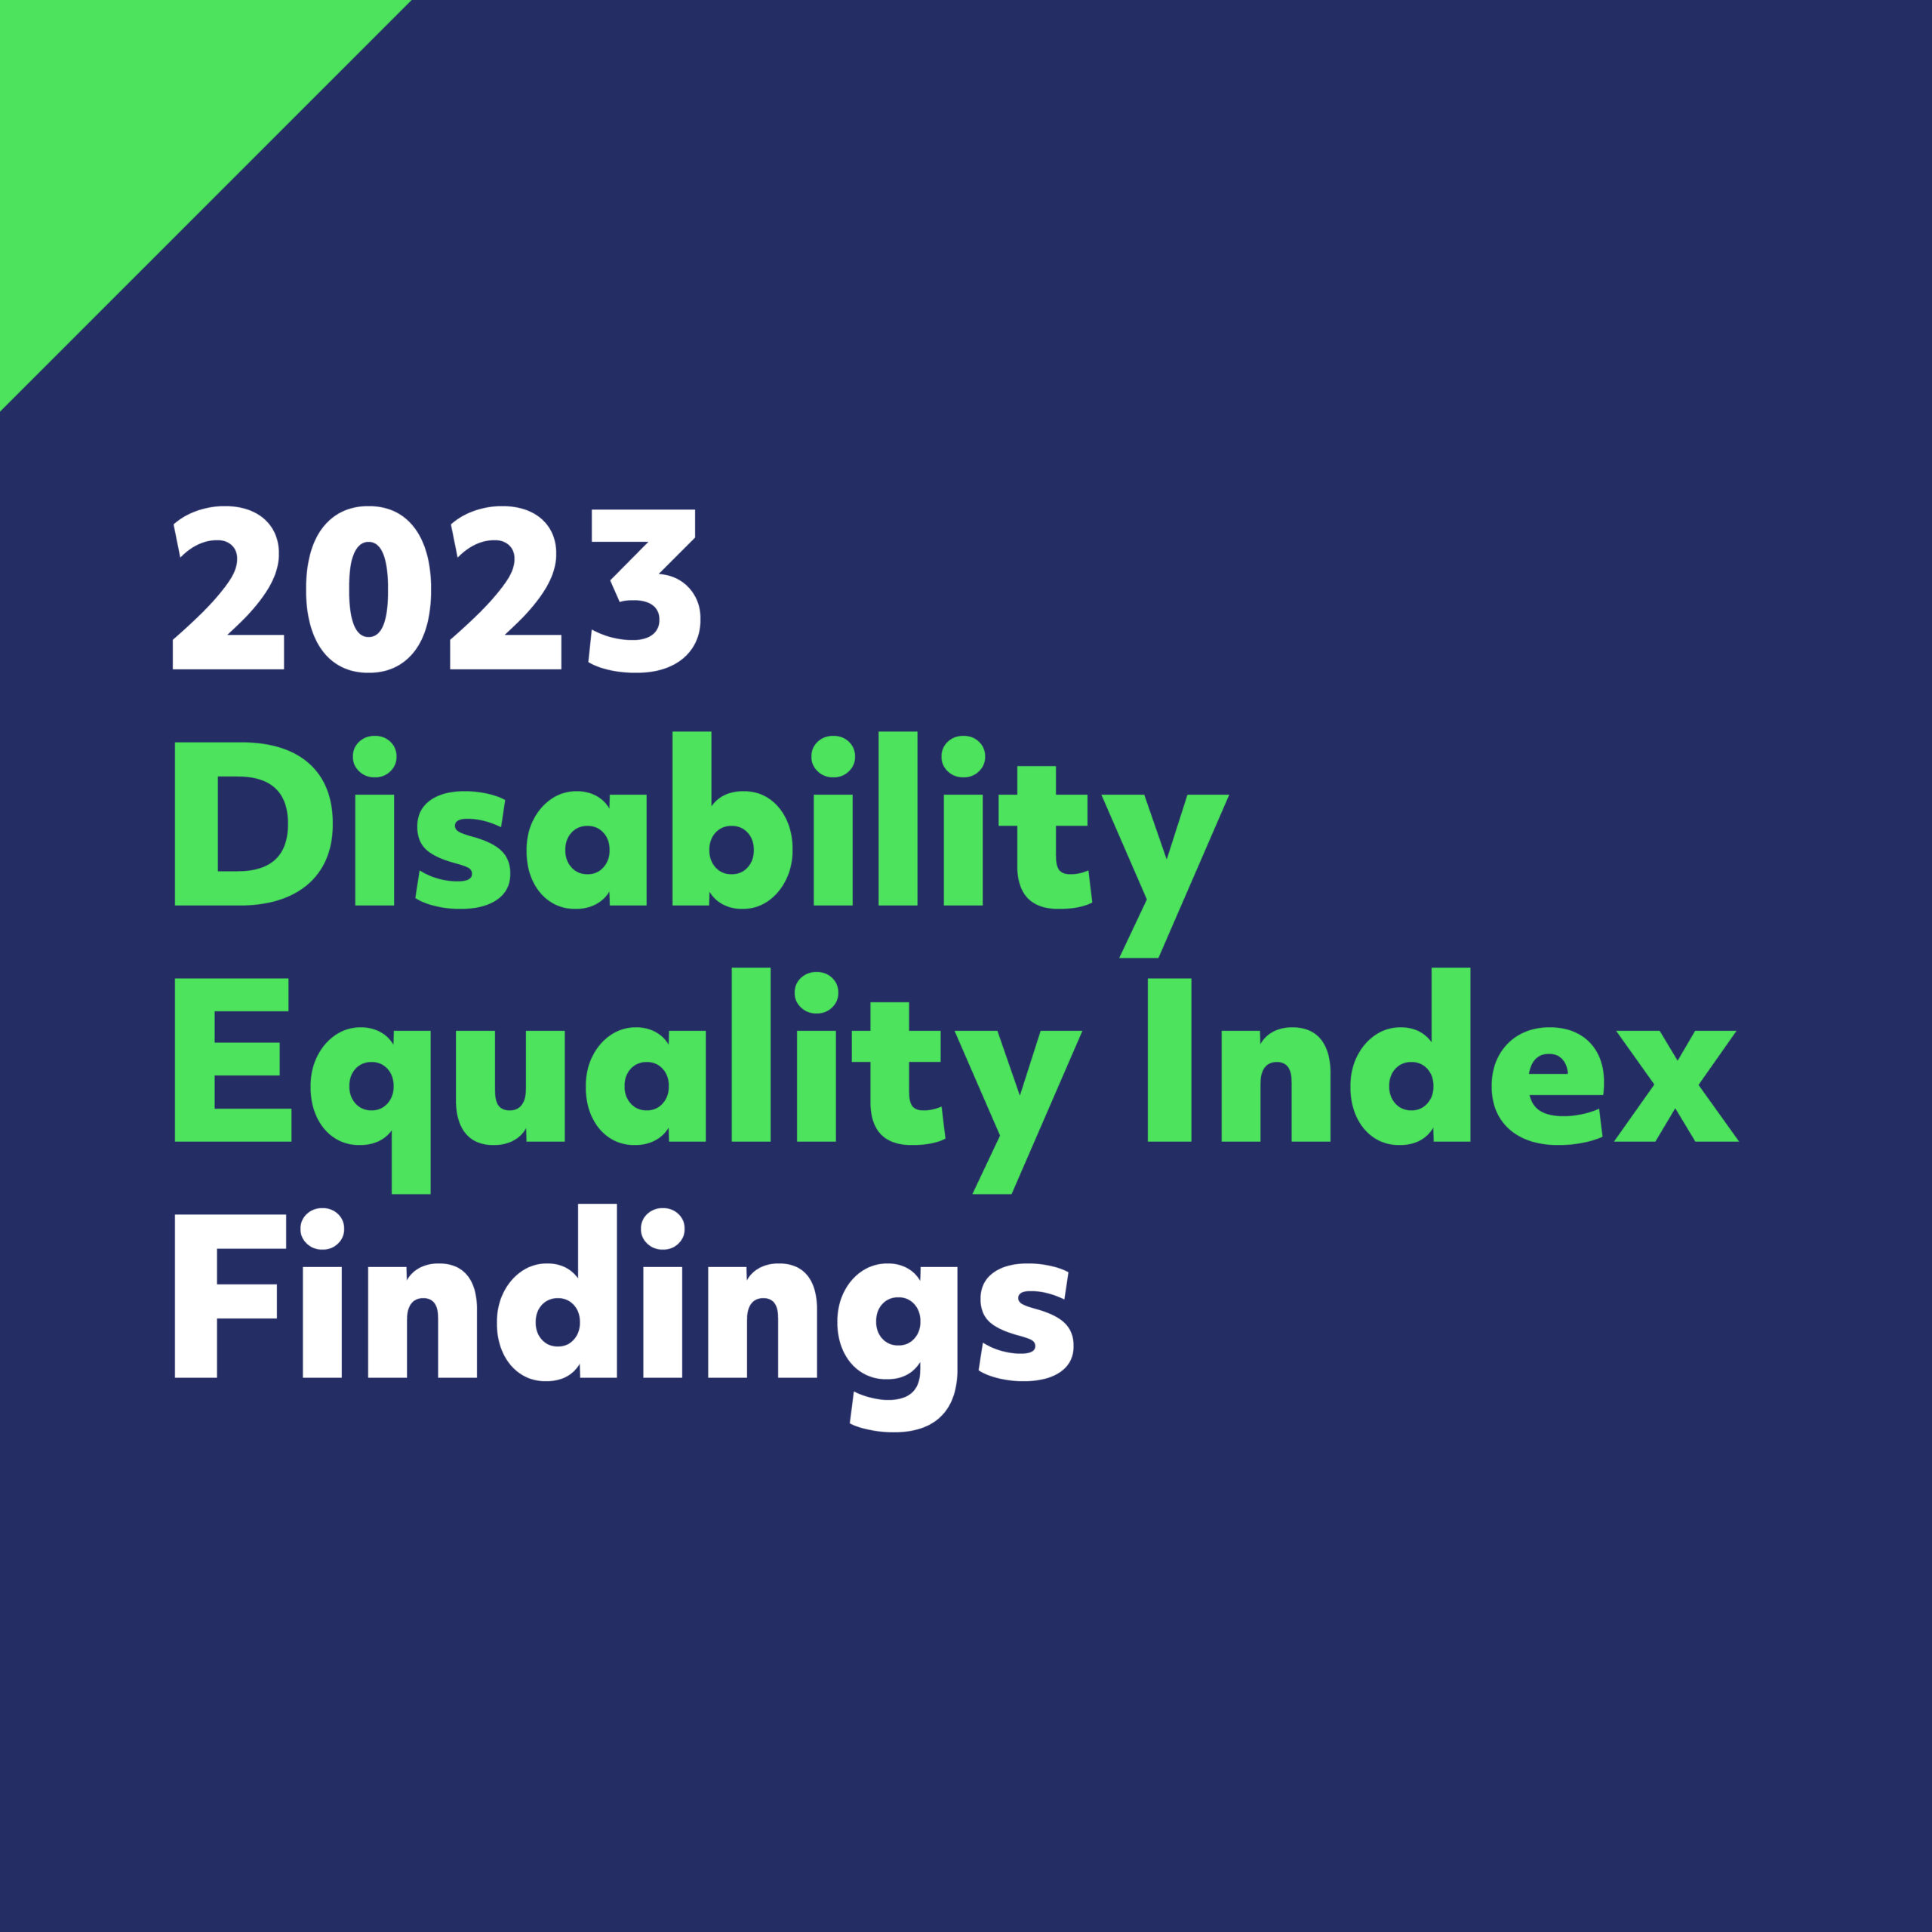 2023 Disability Equality Index Findings.